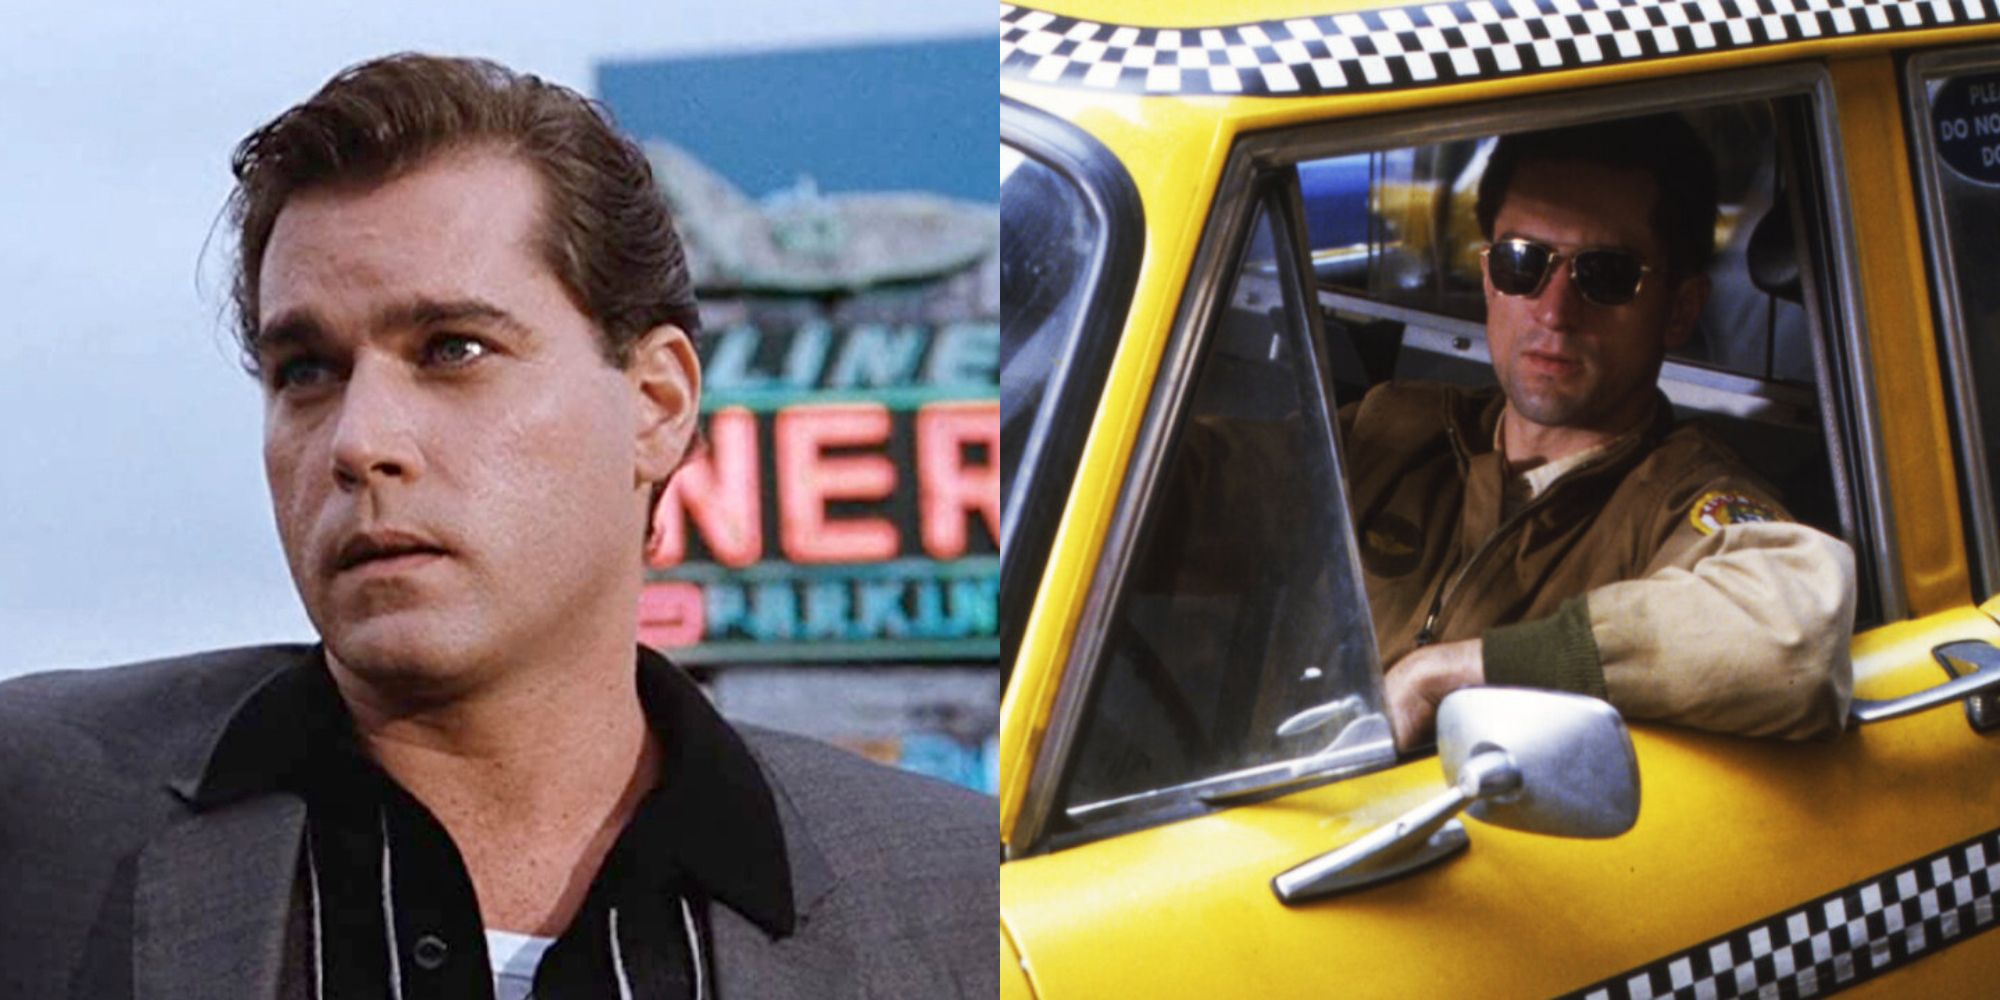 A split image of Ray Liotta looking at someone off-screen in Goodfellas and Robert DeNiro driving a cab in Taxi Driver